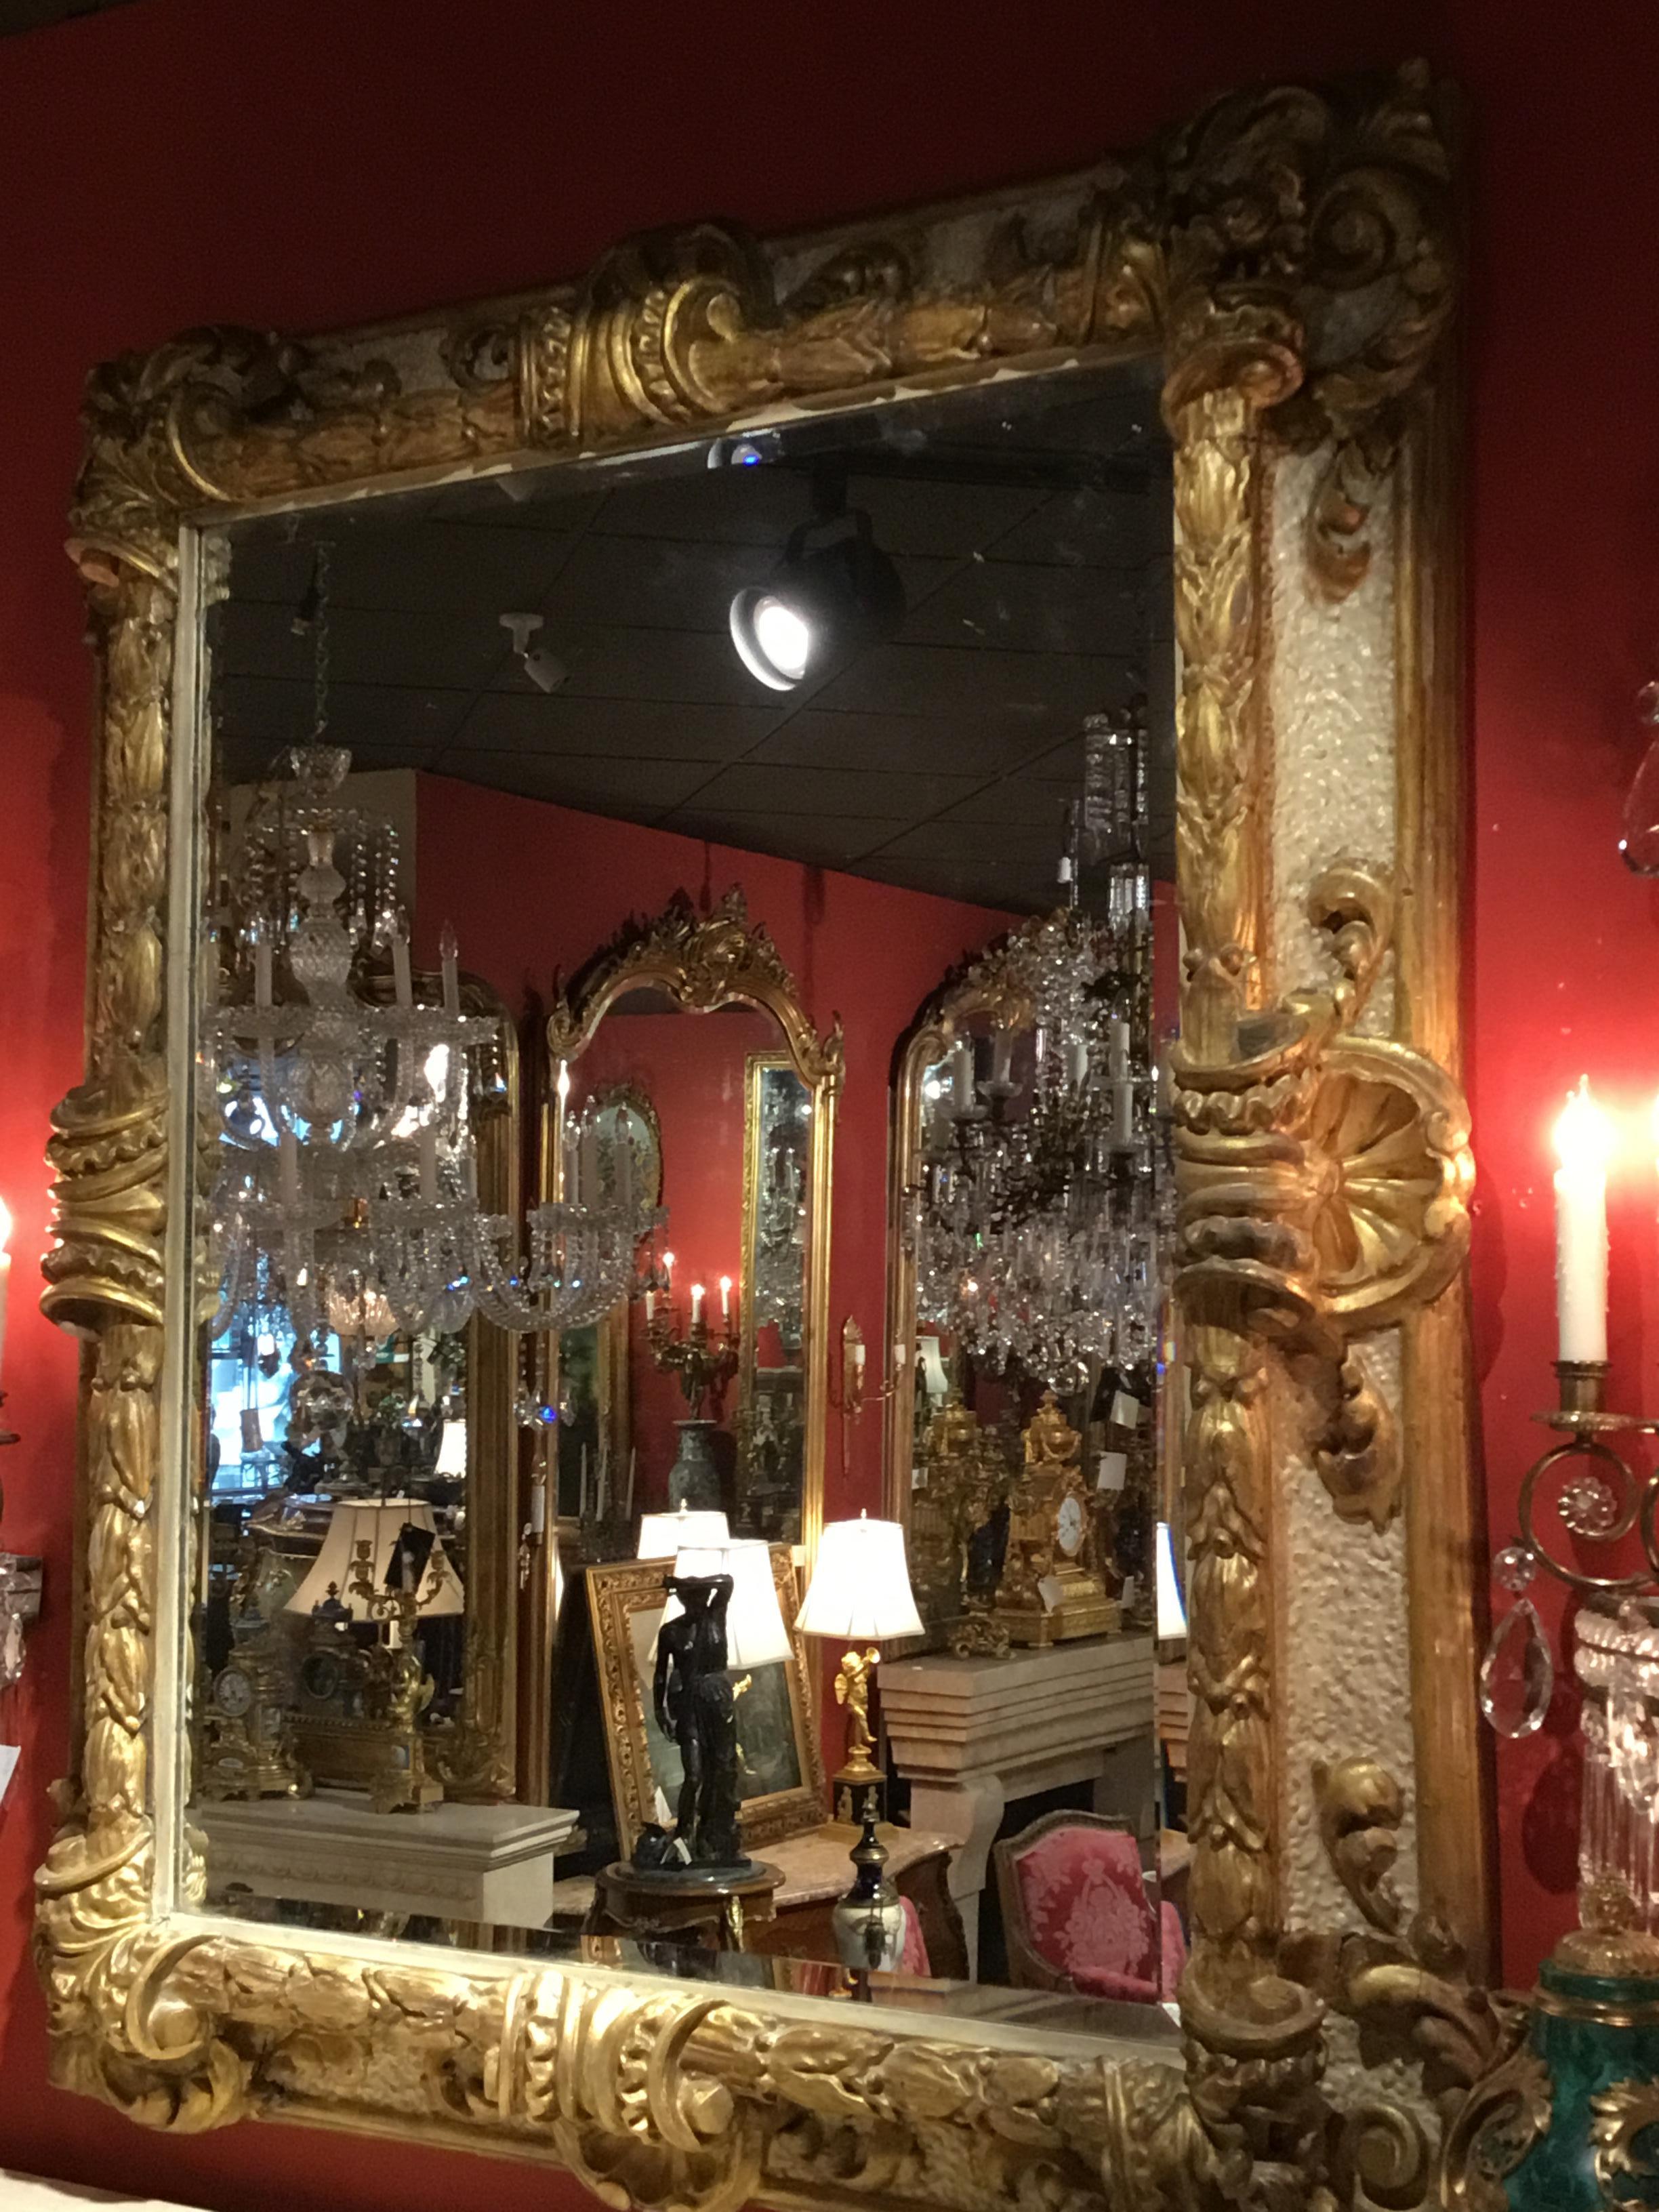 Parcel gilt and parcel paint embellish this beautifully carved frame surrounding 
This beveled mirror. Italian carved with berry and leaf design and large scallops 
At the corners and midway down each side.
  